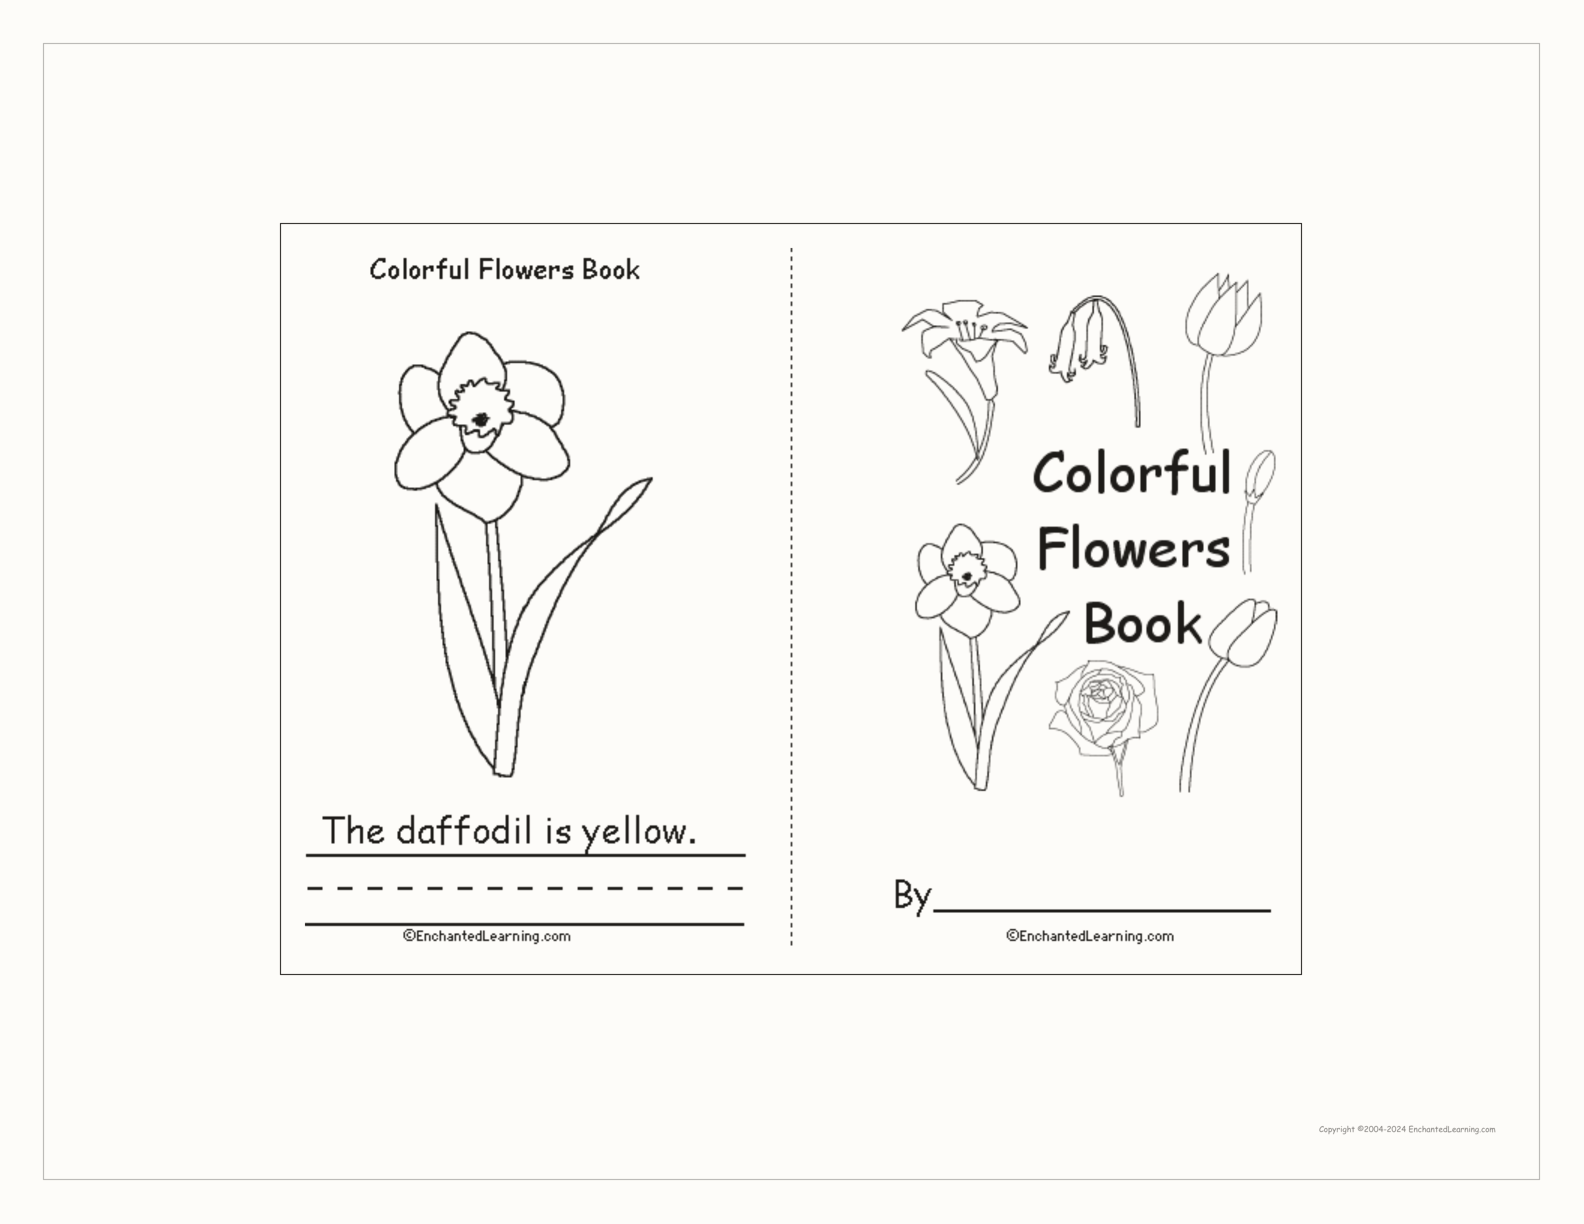 Colorful Flowers Book interactive printout page 1